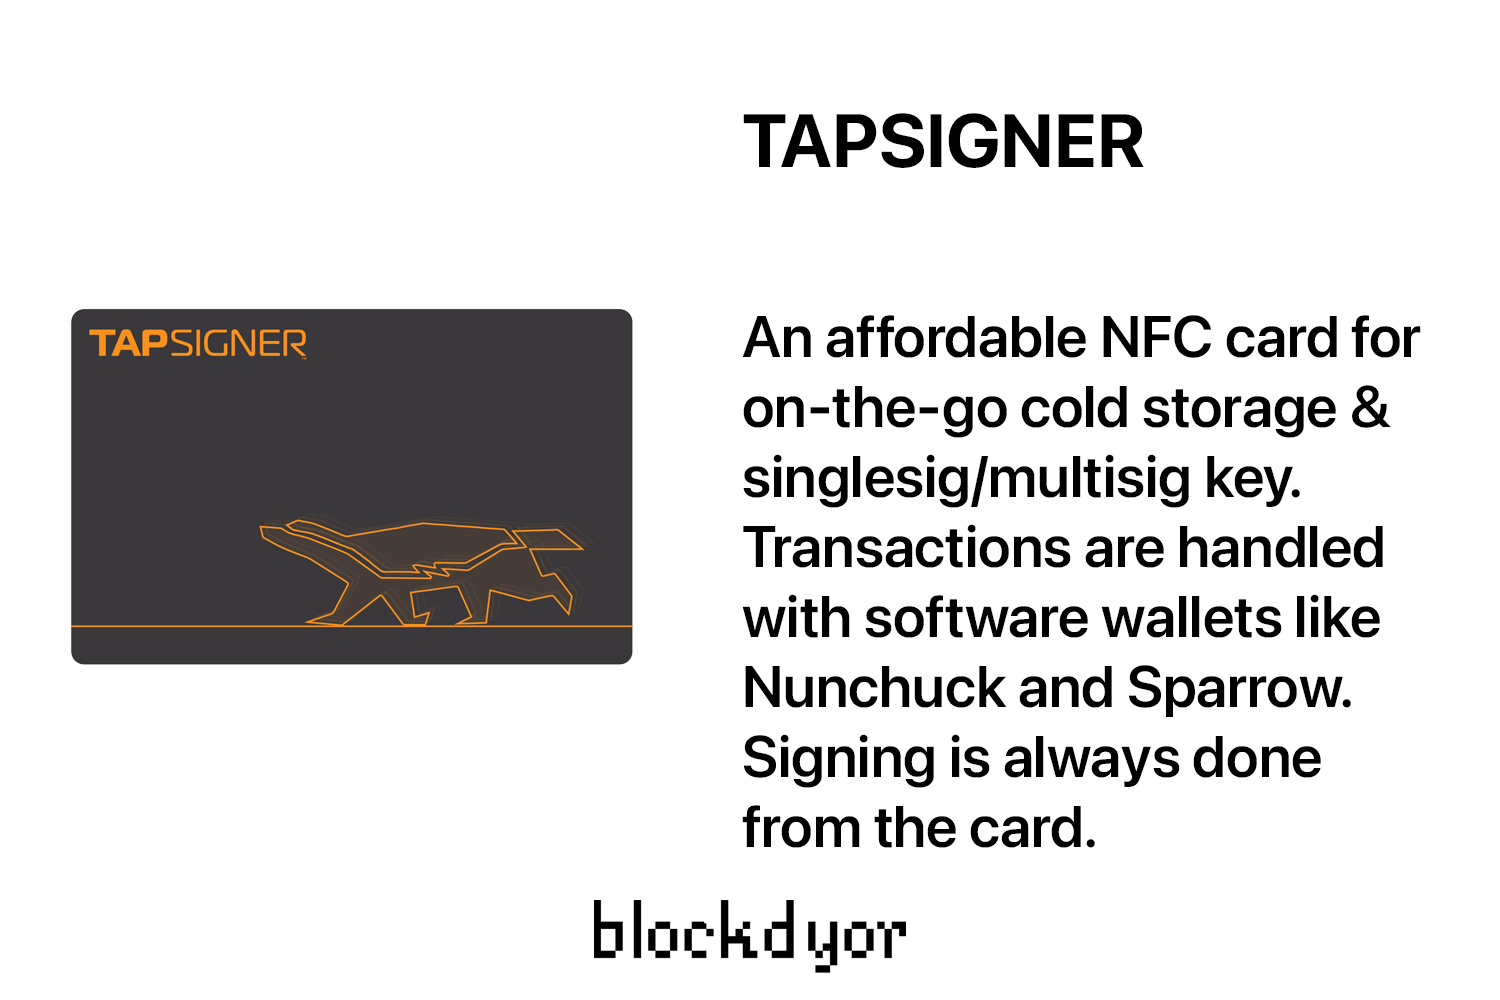 Tapsigner Overview